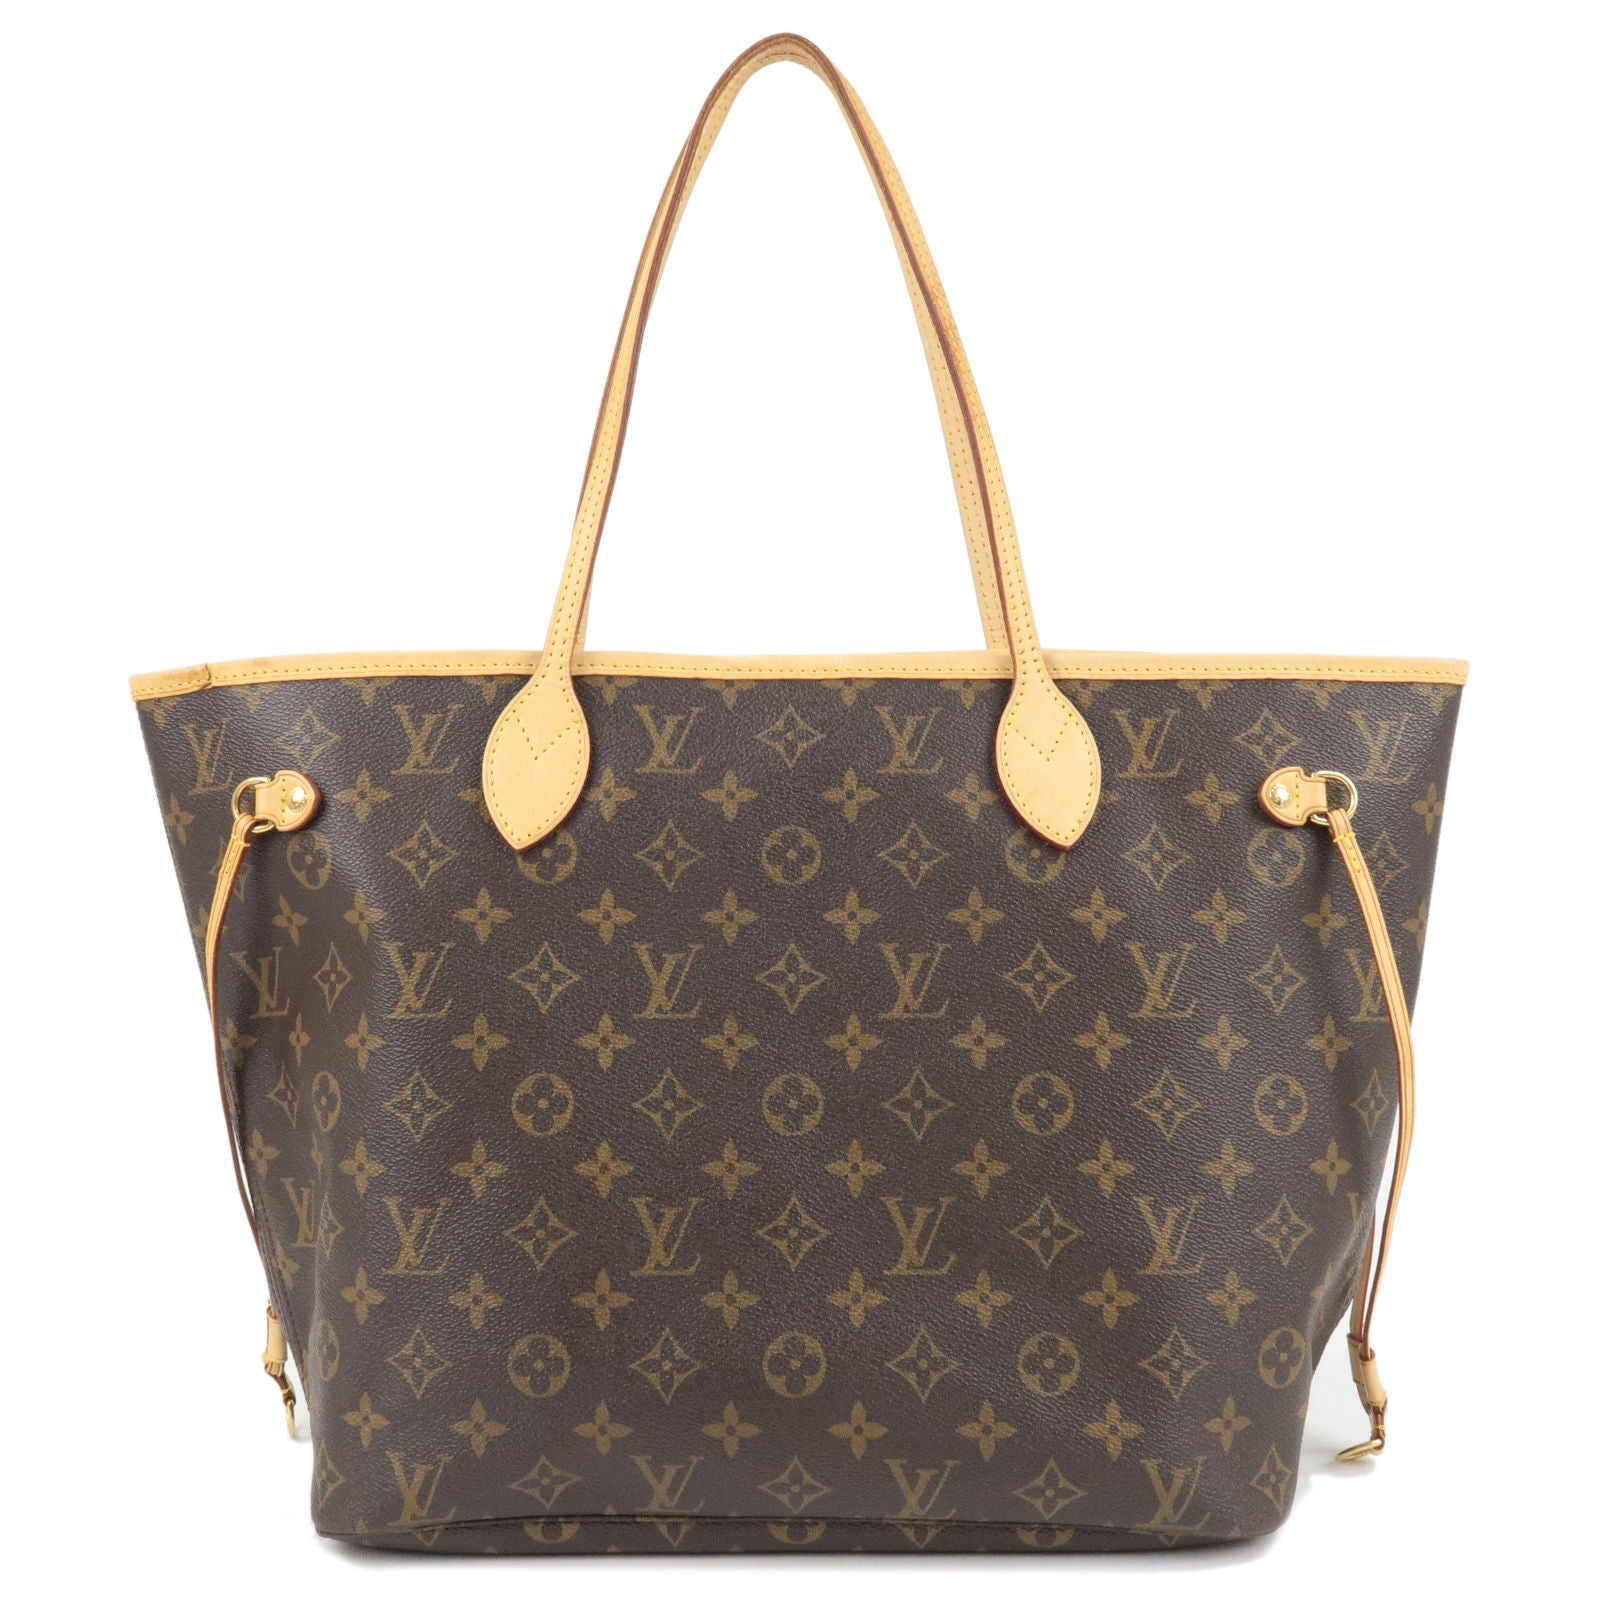 Louis Vuitton Epi Leather Black Neverfull Mm With Charms